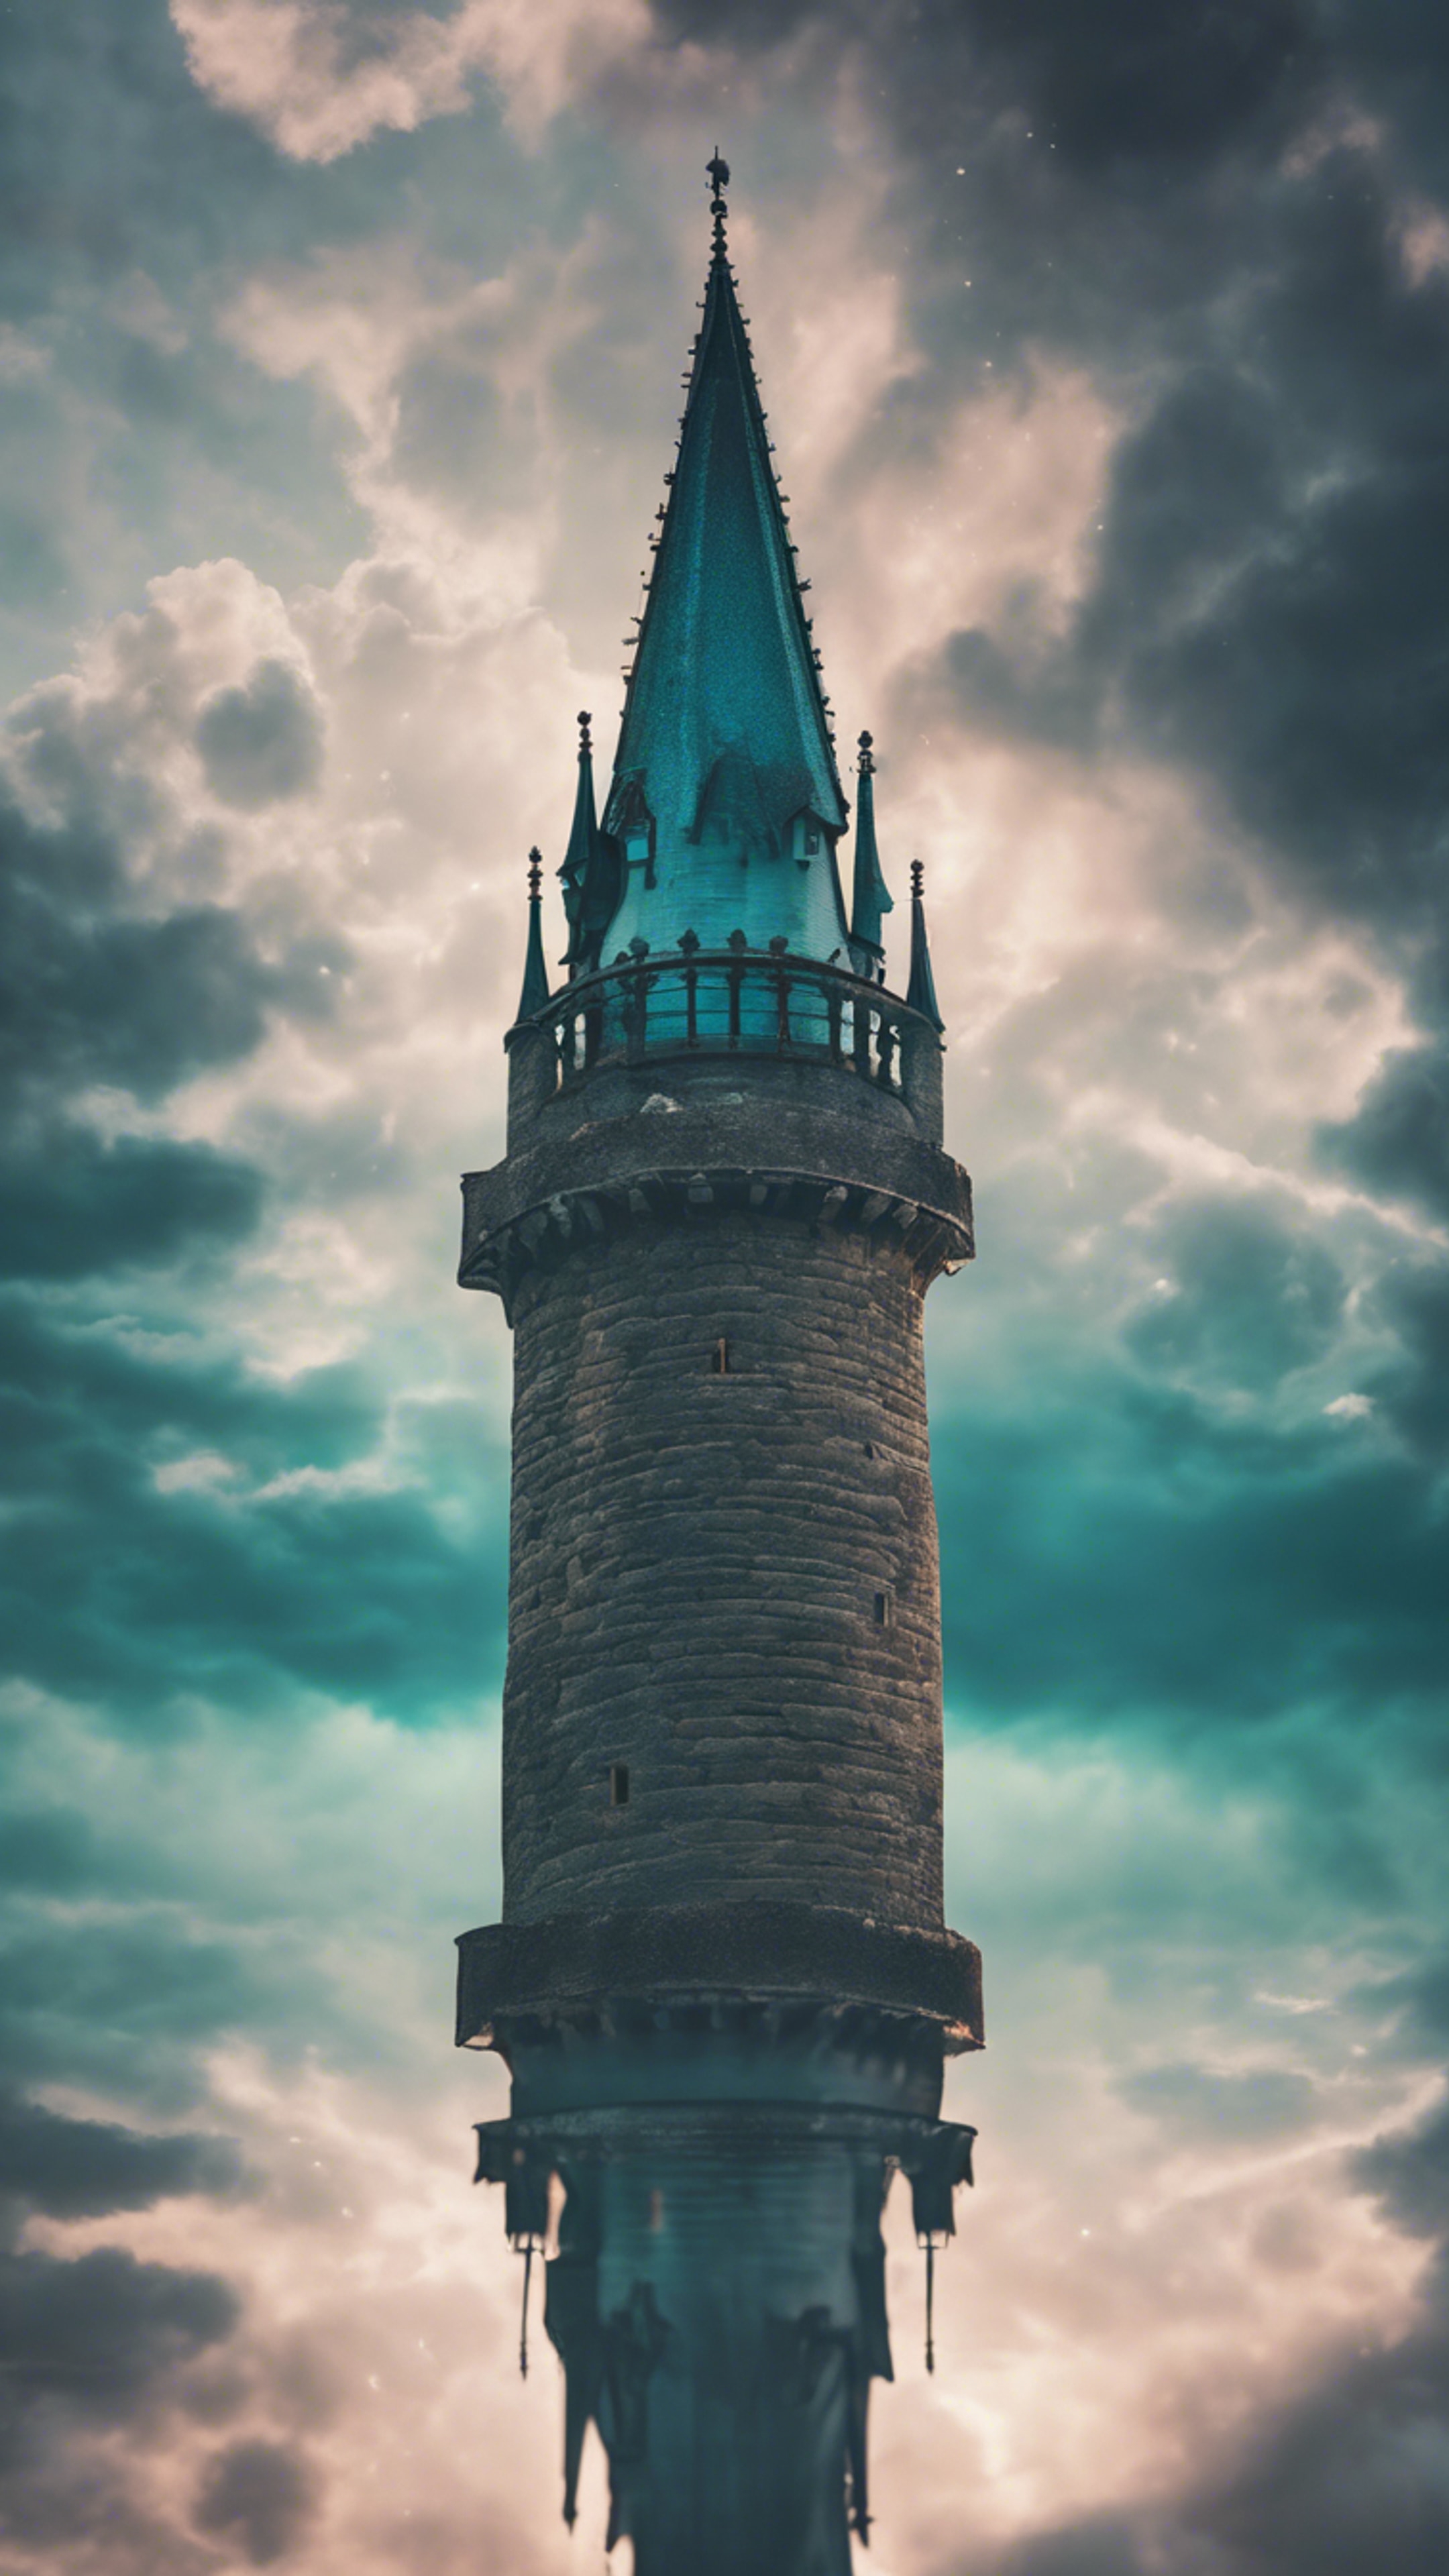 A Gothic castle tower reaching into the clouds, lit from within by mystery teal lights. Wallpaper[95b6d3de171842619bd4]